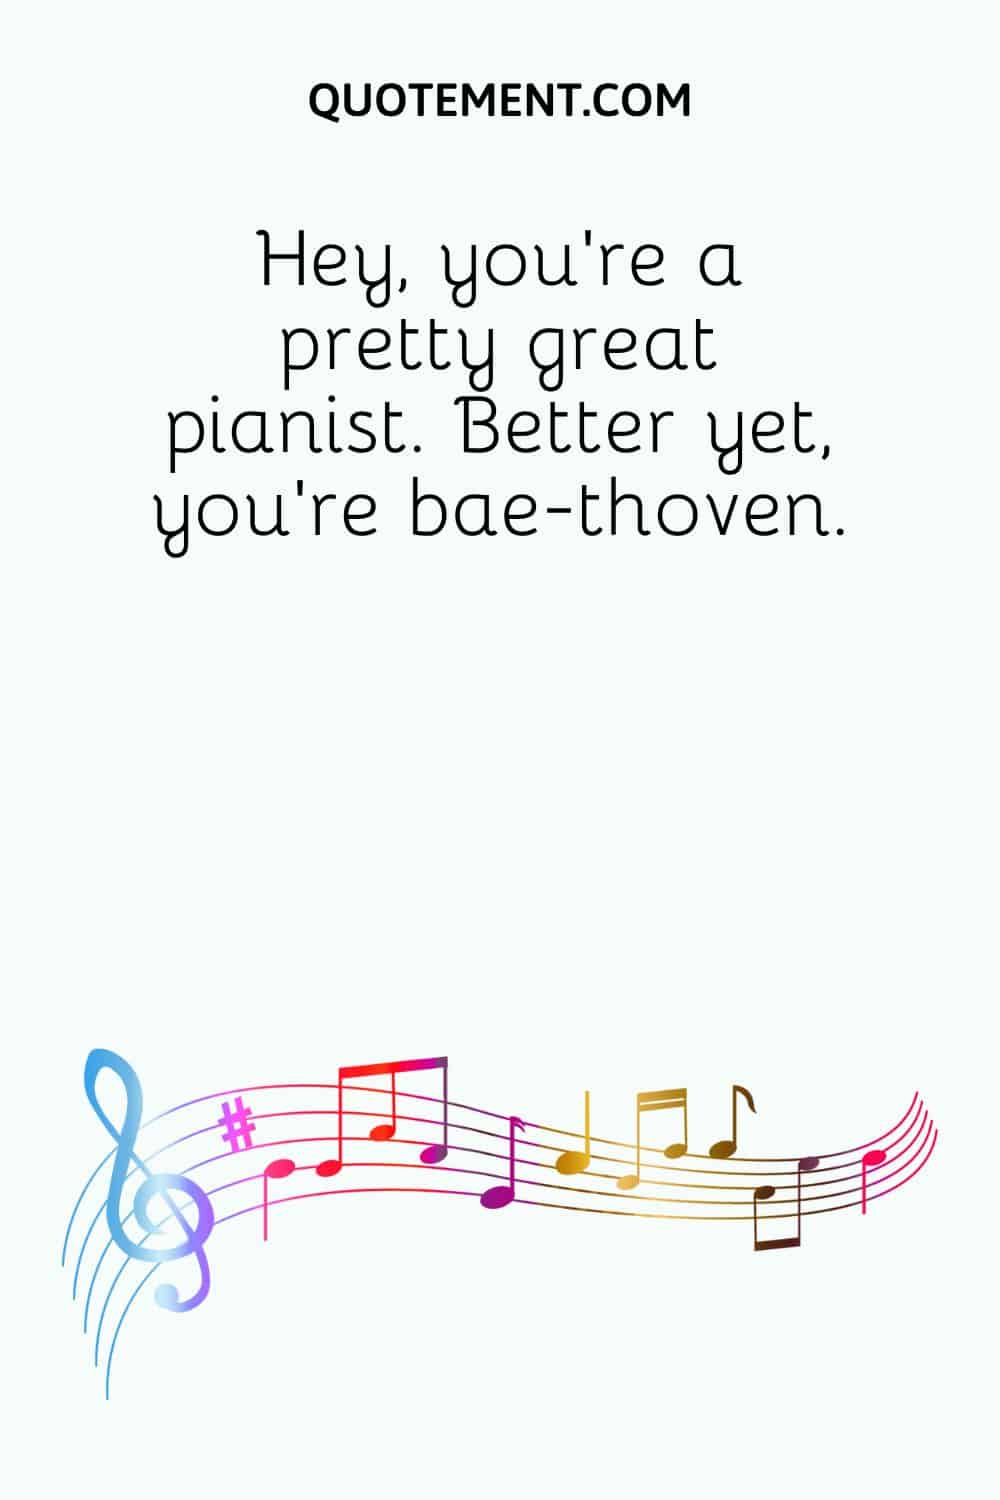 Hey, you're a pretty great pianist. Better yet, you’re bae-thoven